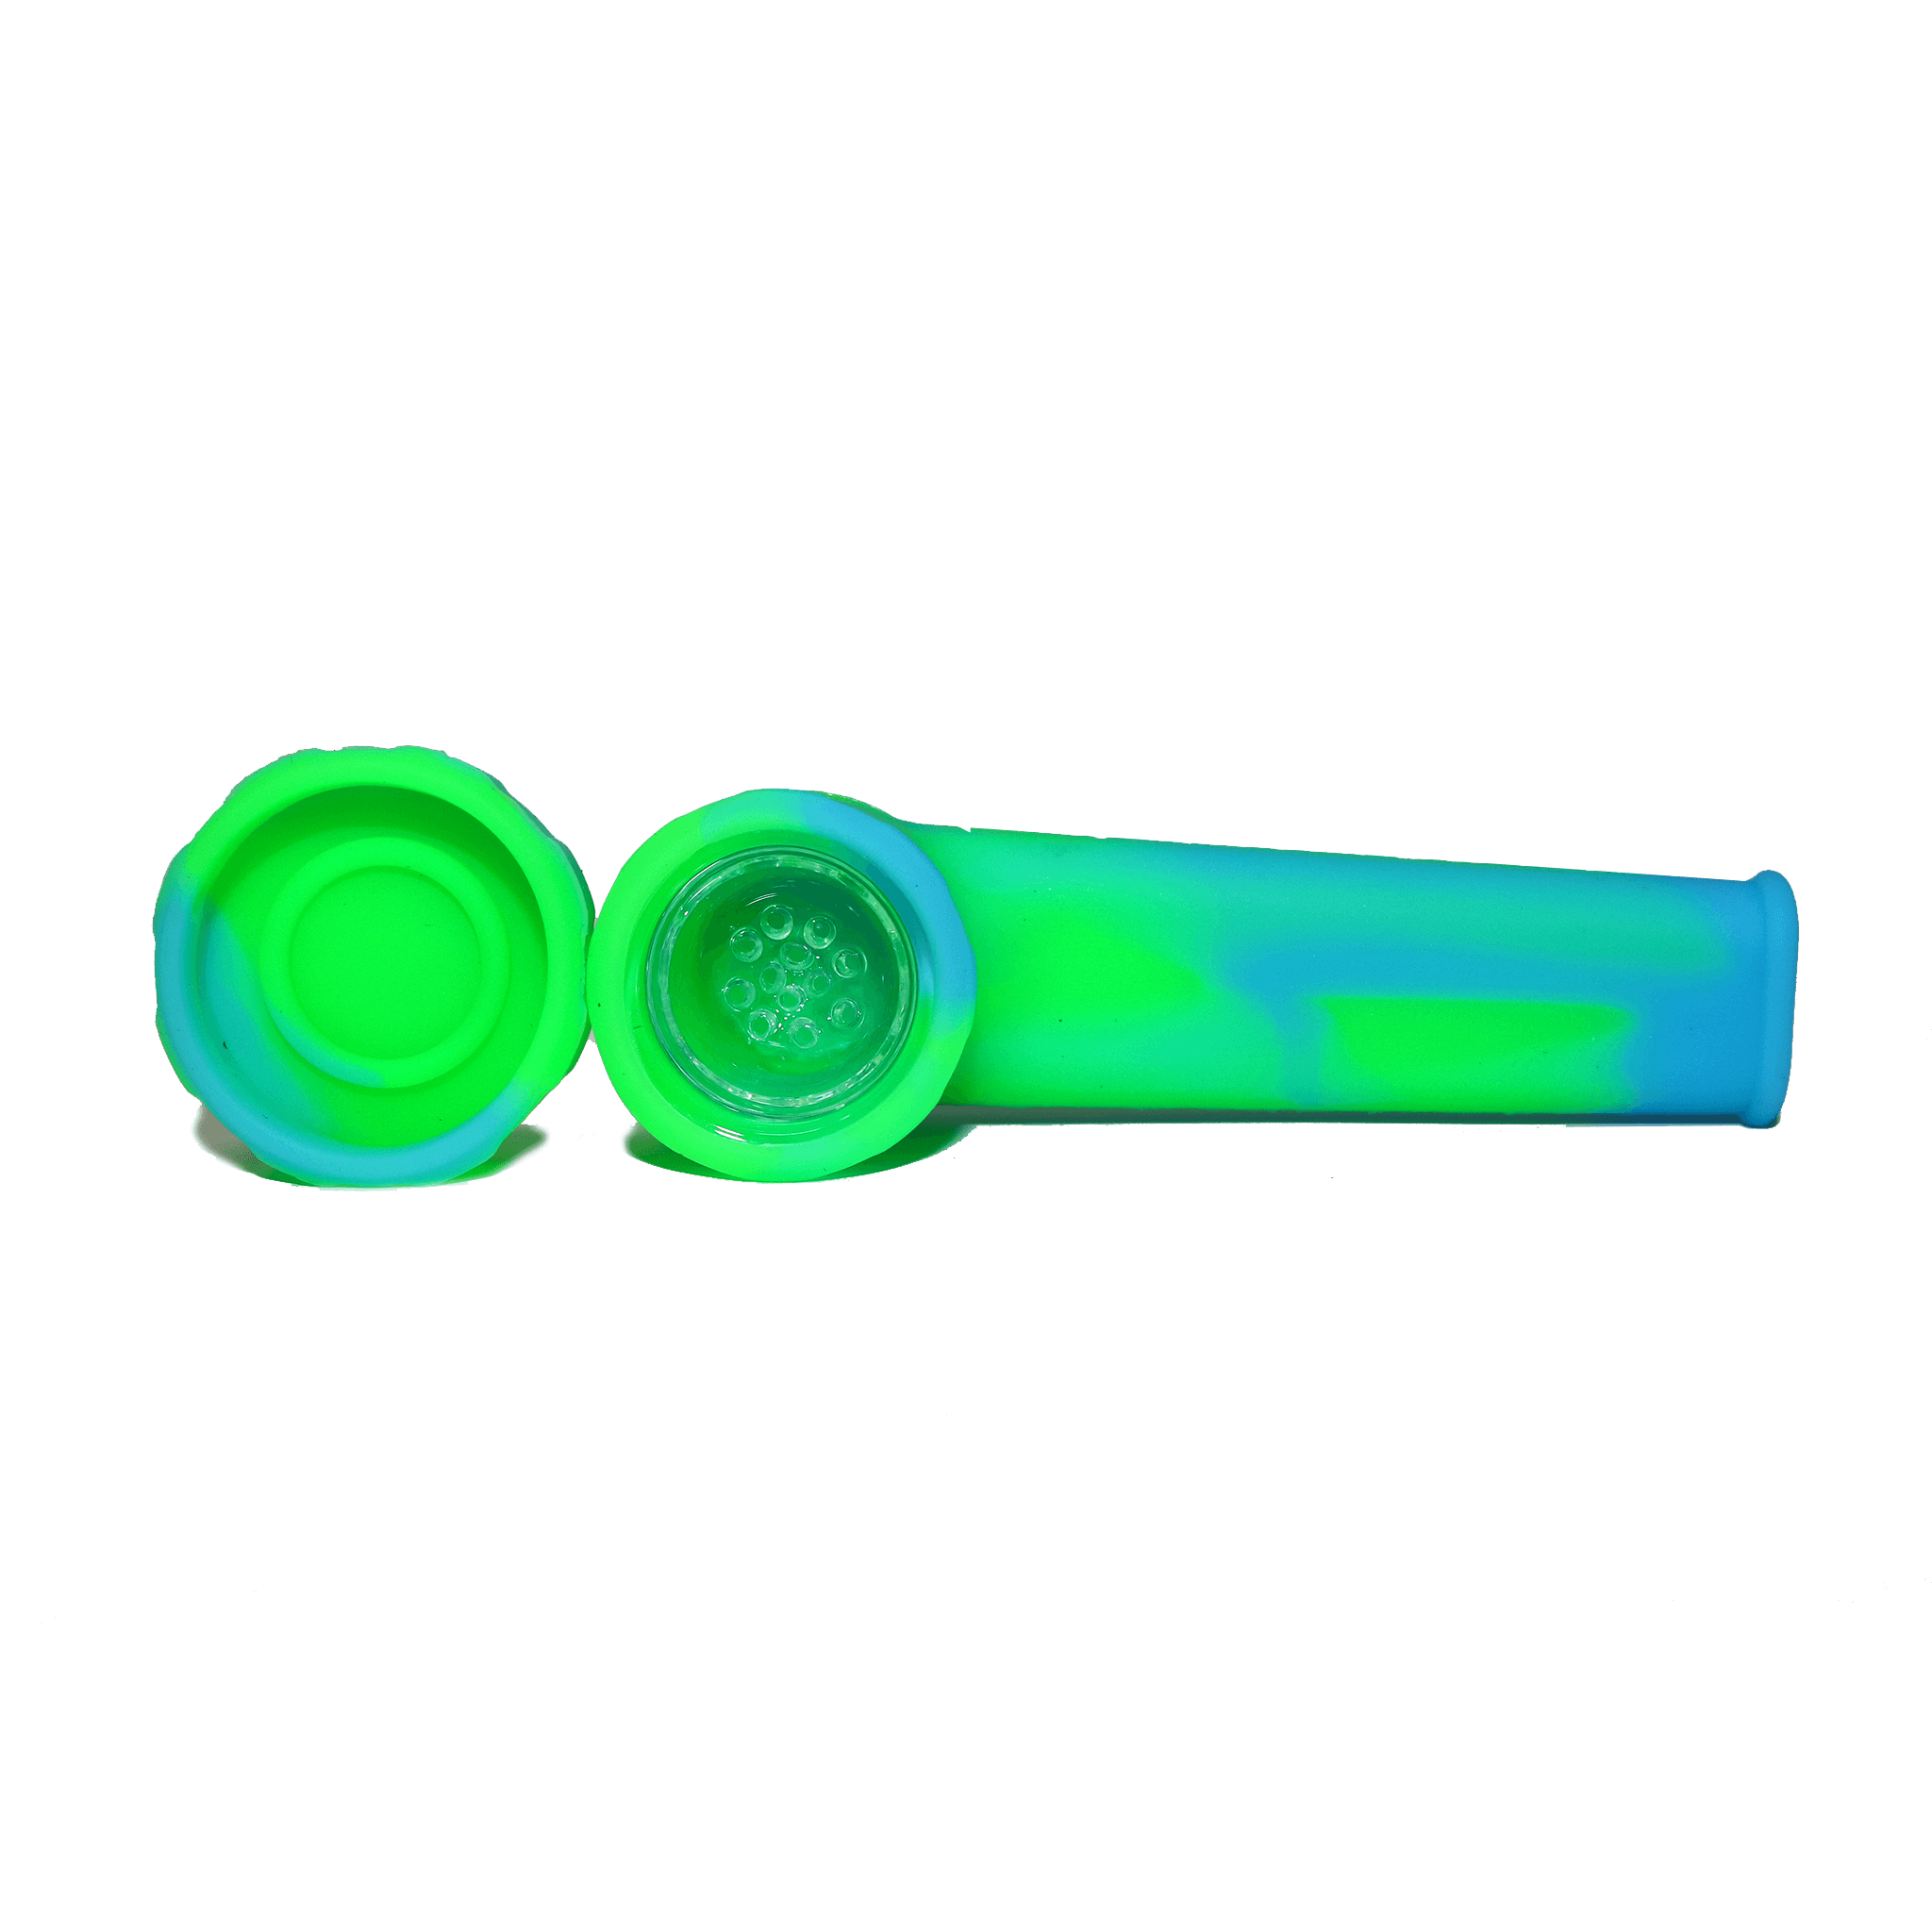 Silicone Smoking Pipe with Glass Bowl & Cap Lid, Geometric Pastel